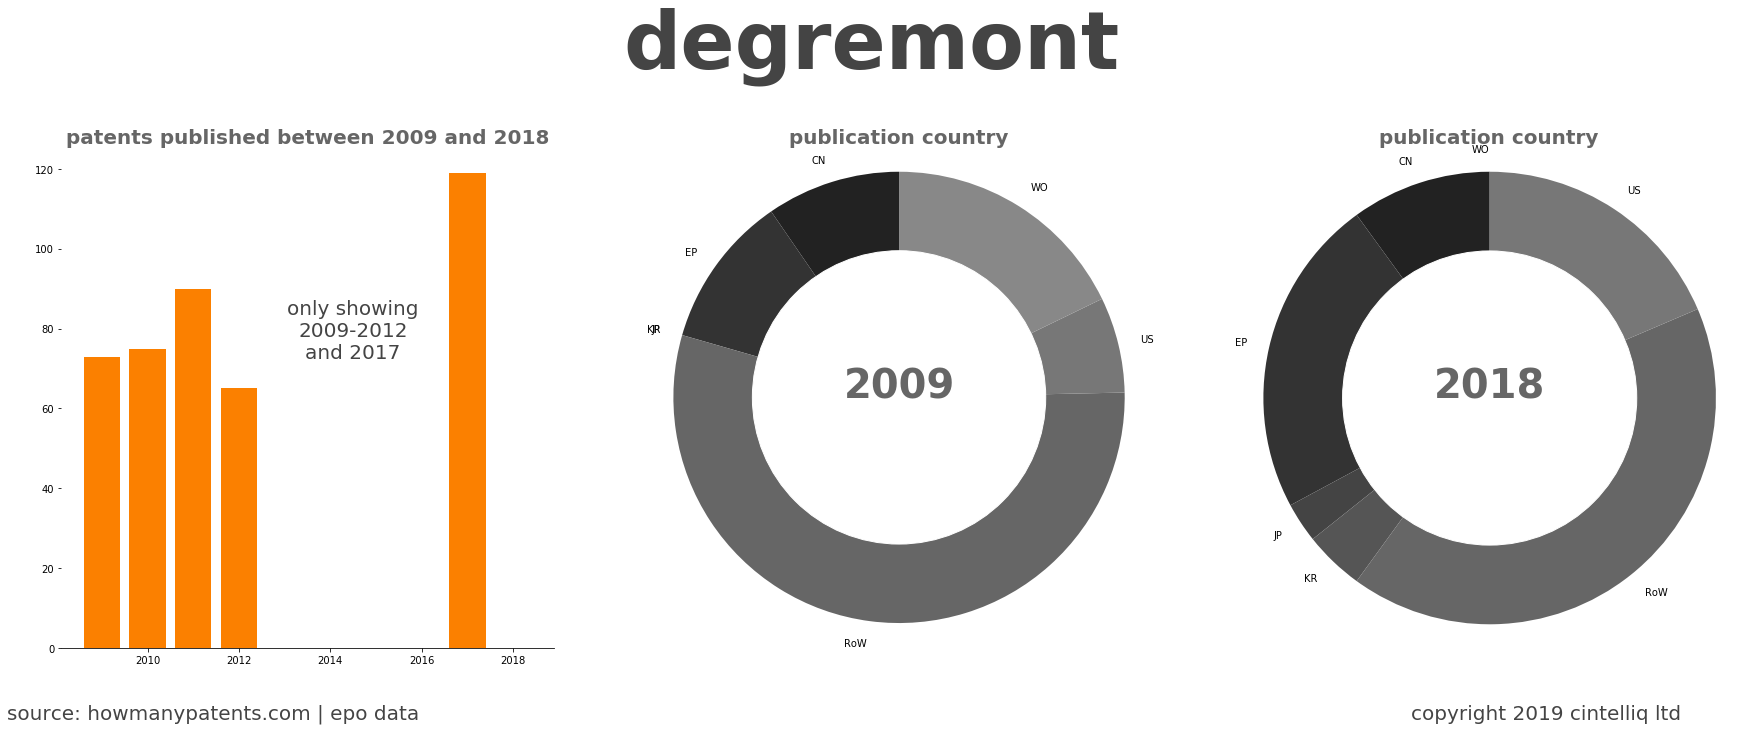 summary of patents for Degremont